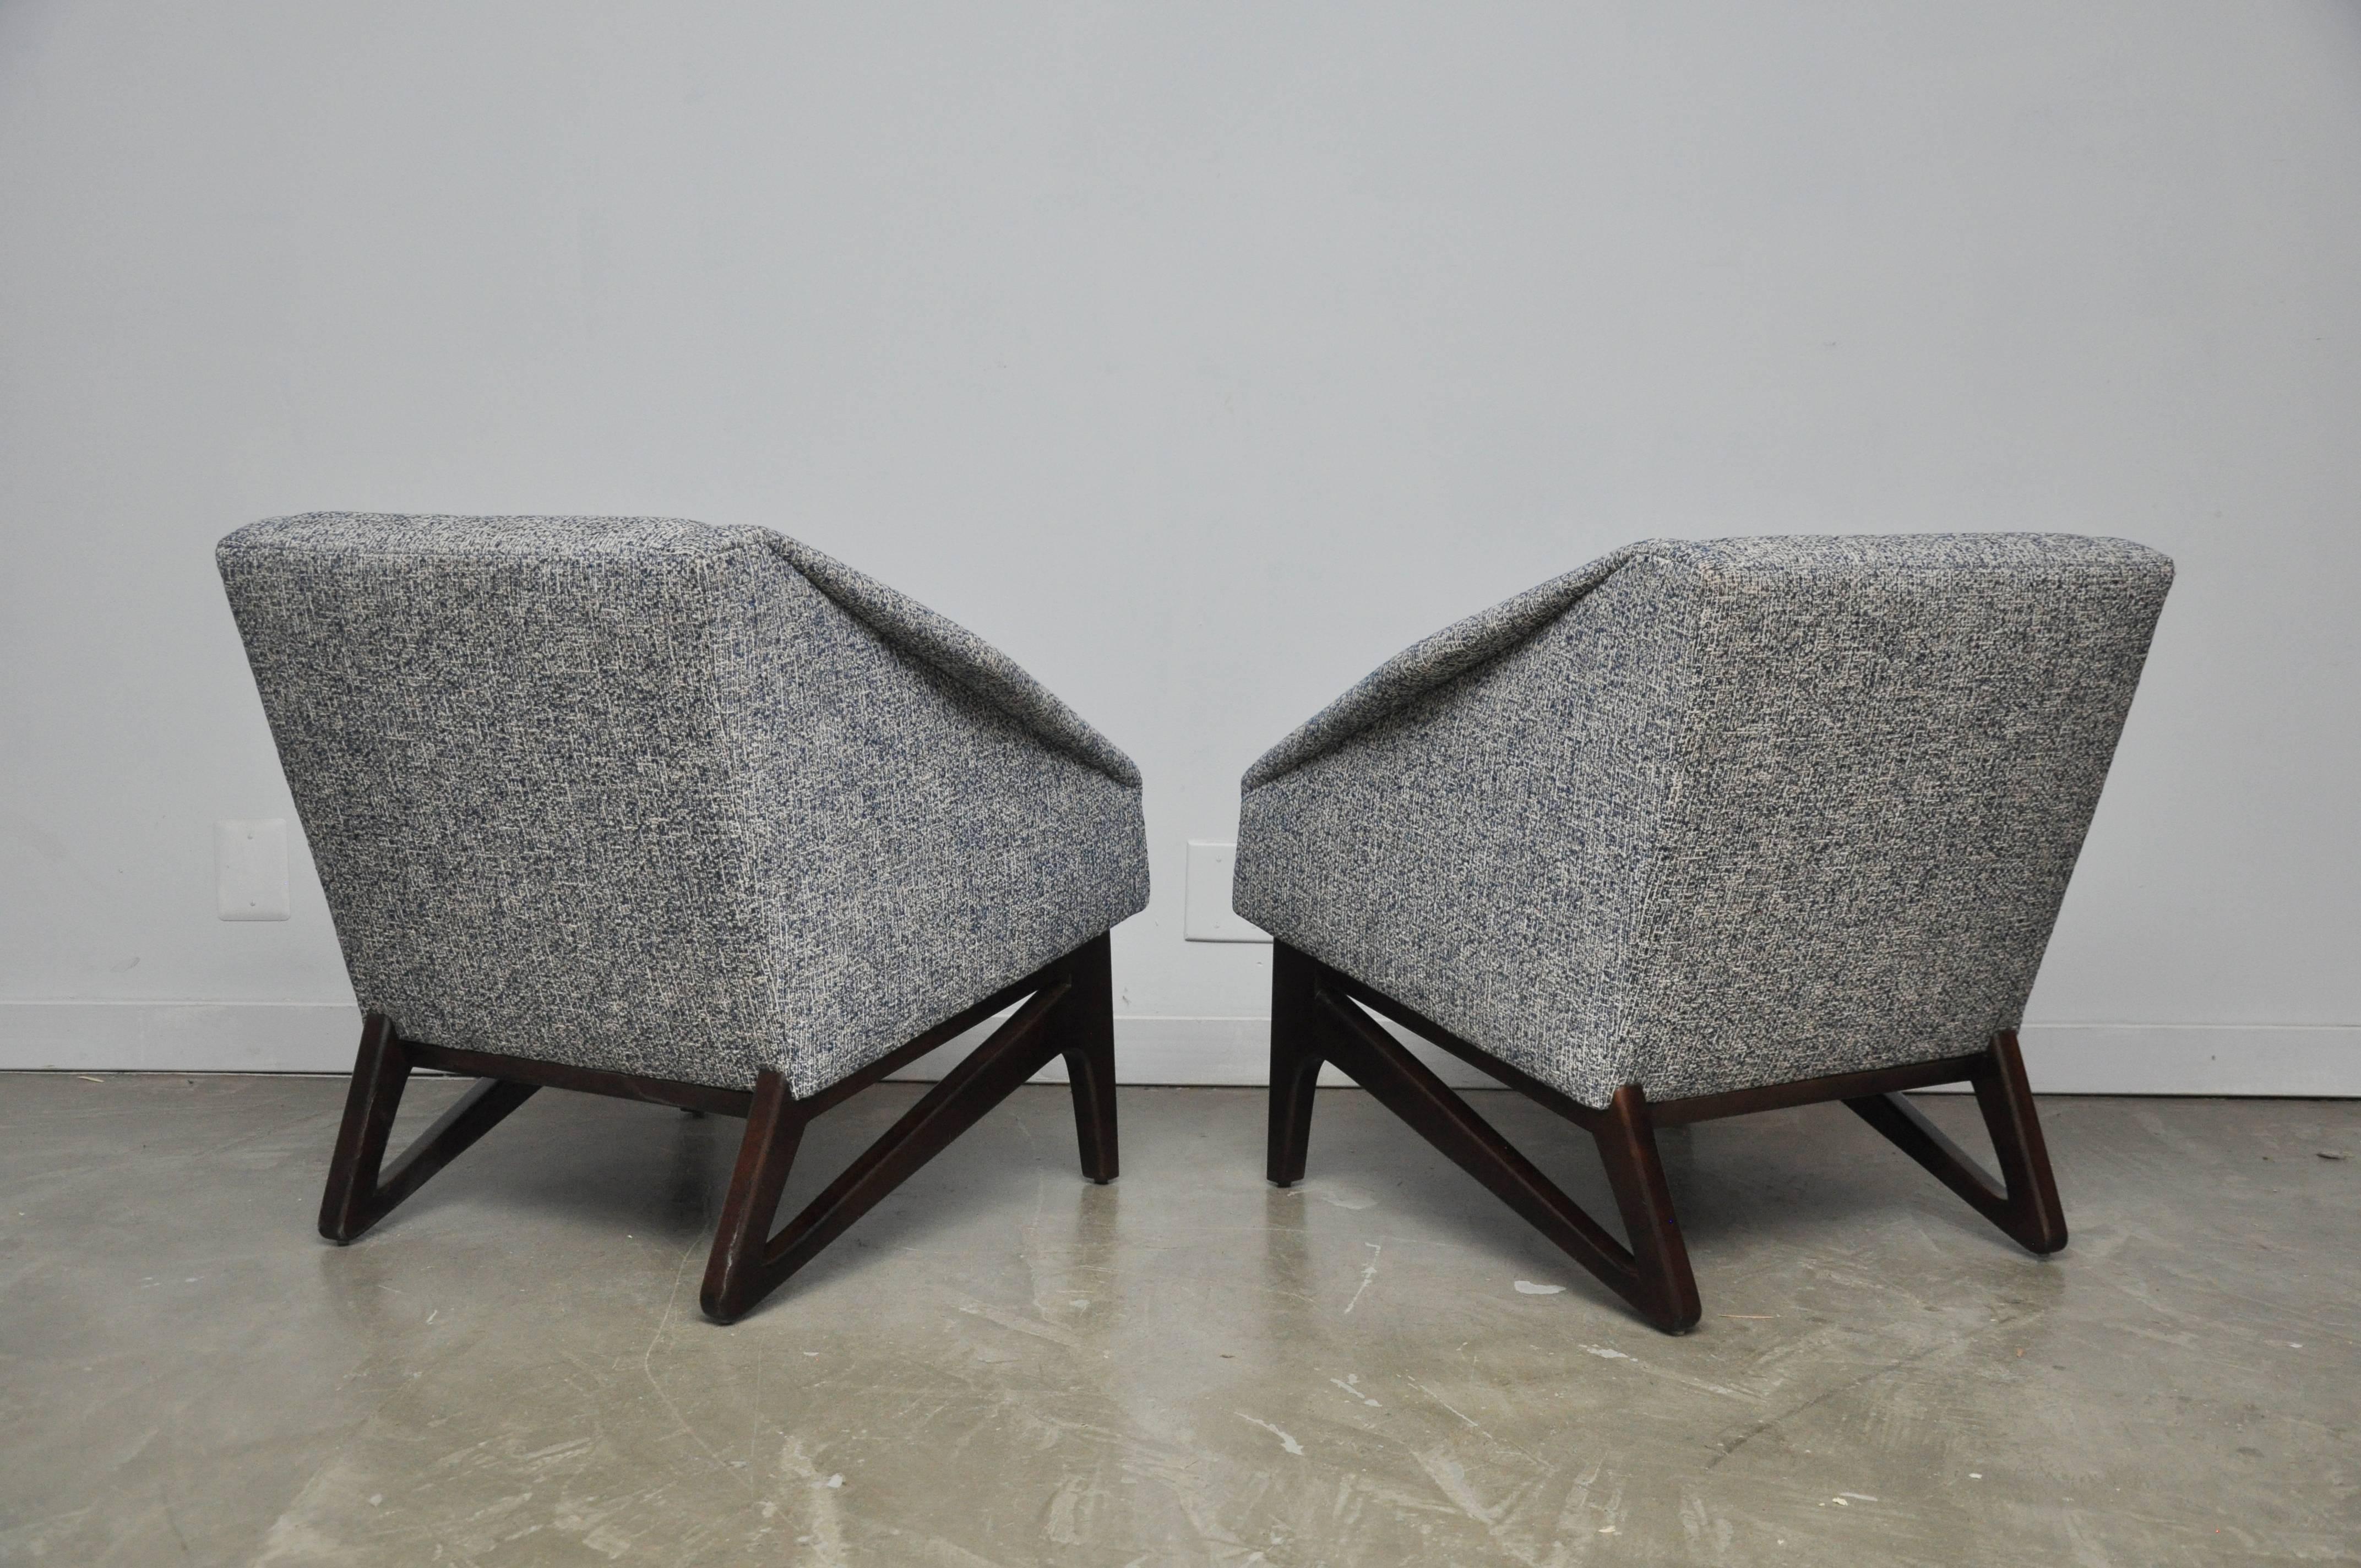 Italian lounge chairs with sculptural from walnut bases with diamond form arms. Fully restored and reupholstered in new blue or white weave fabric.